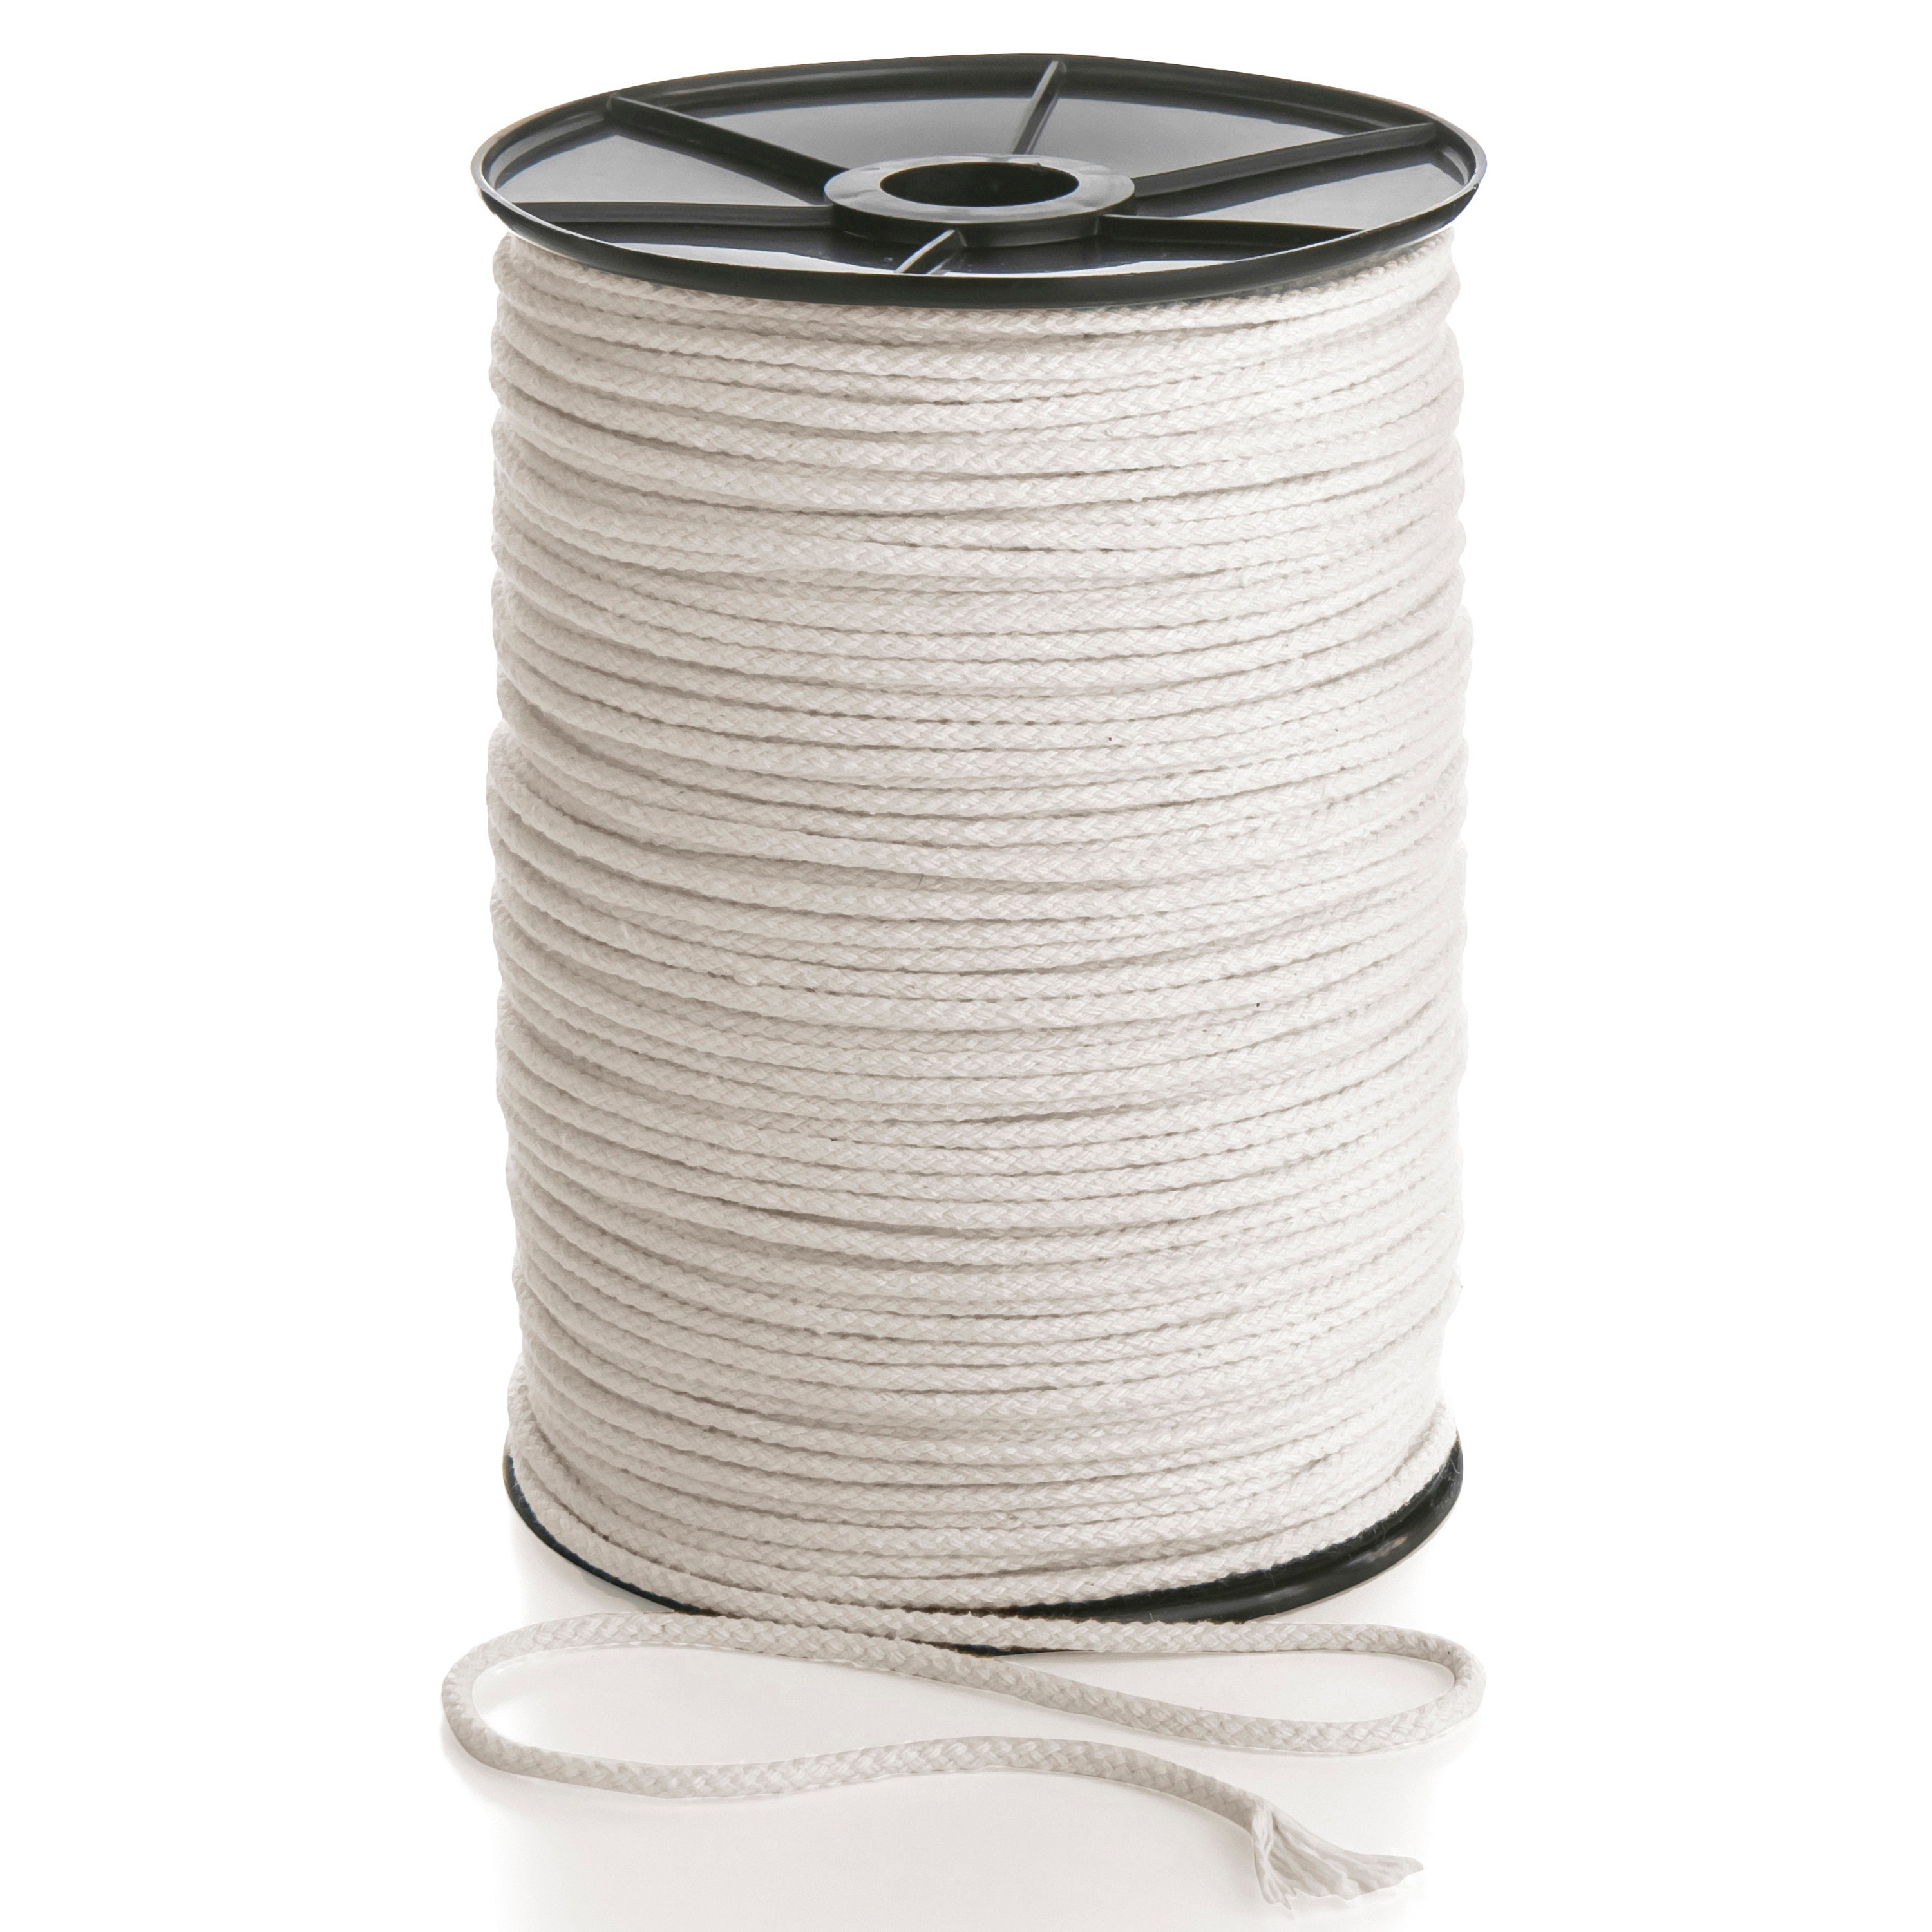 3mm Braided Cotton Cord 200m Natural Rope Macrame Cord, Whole